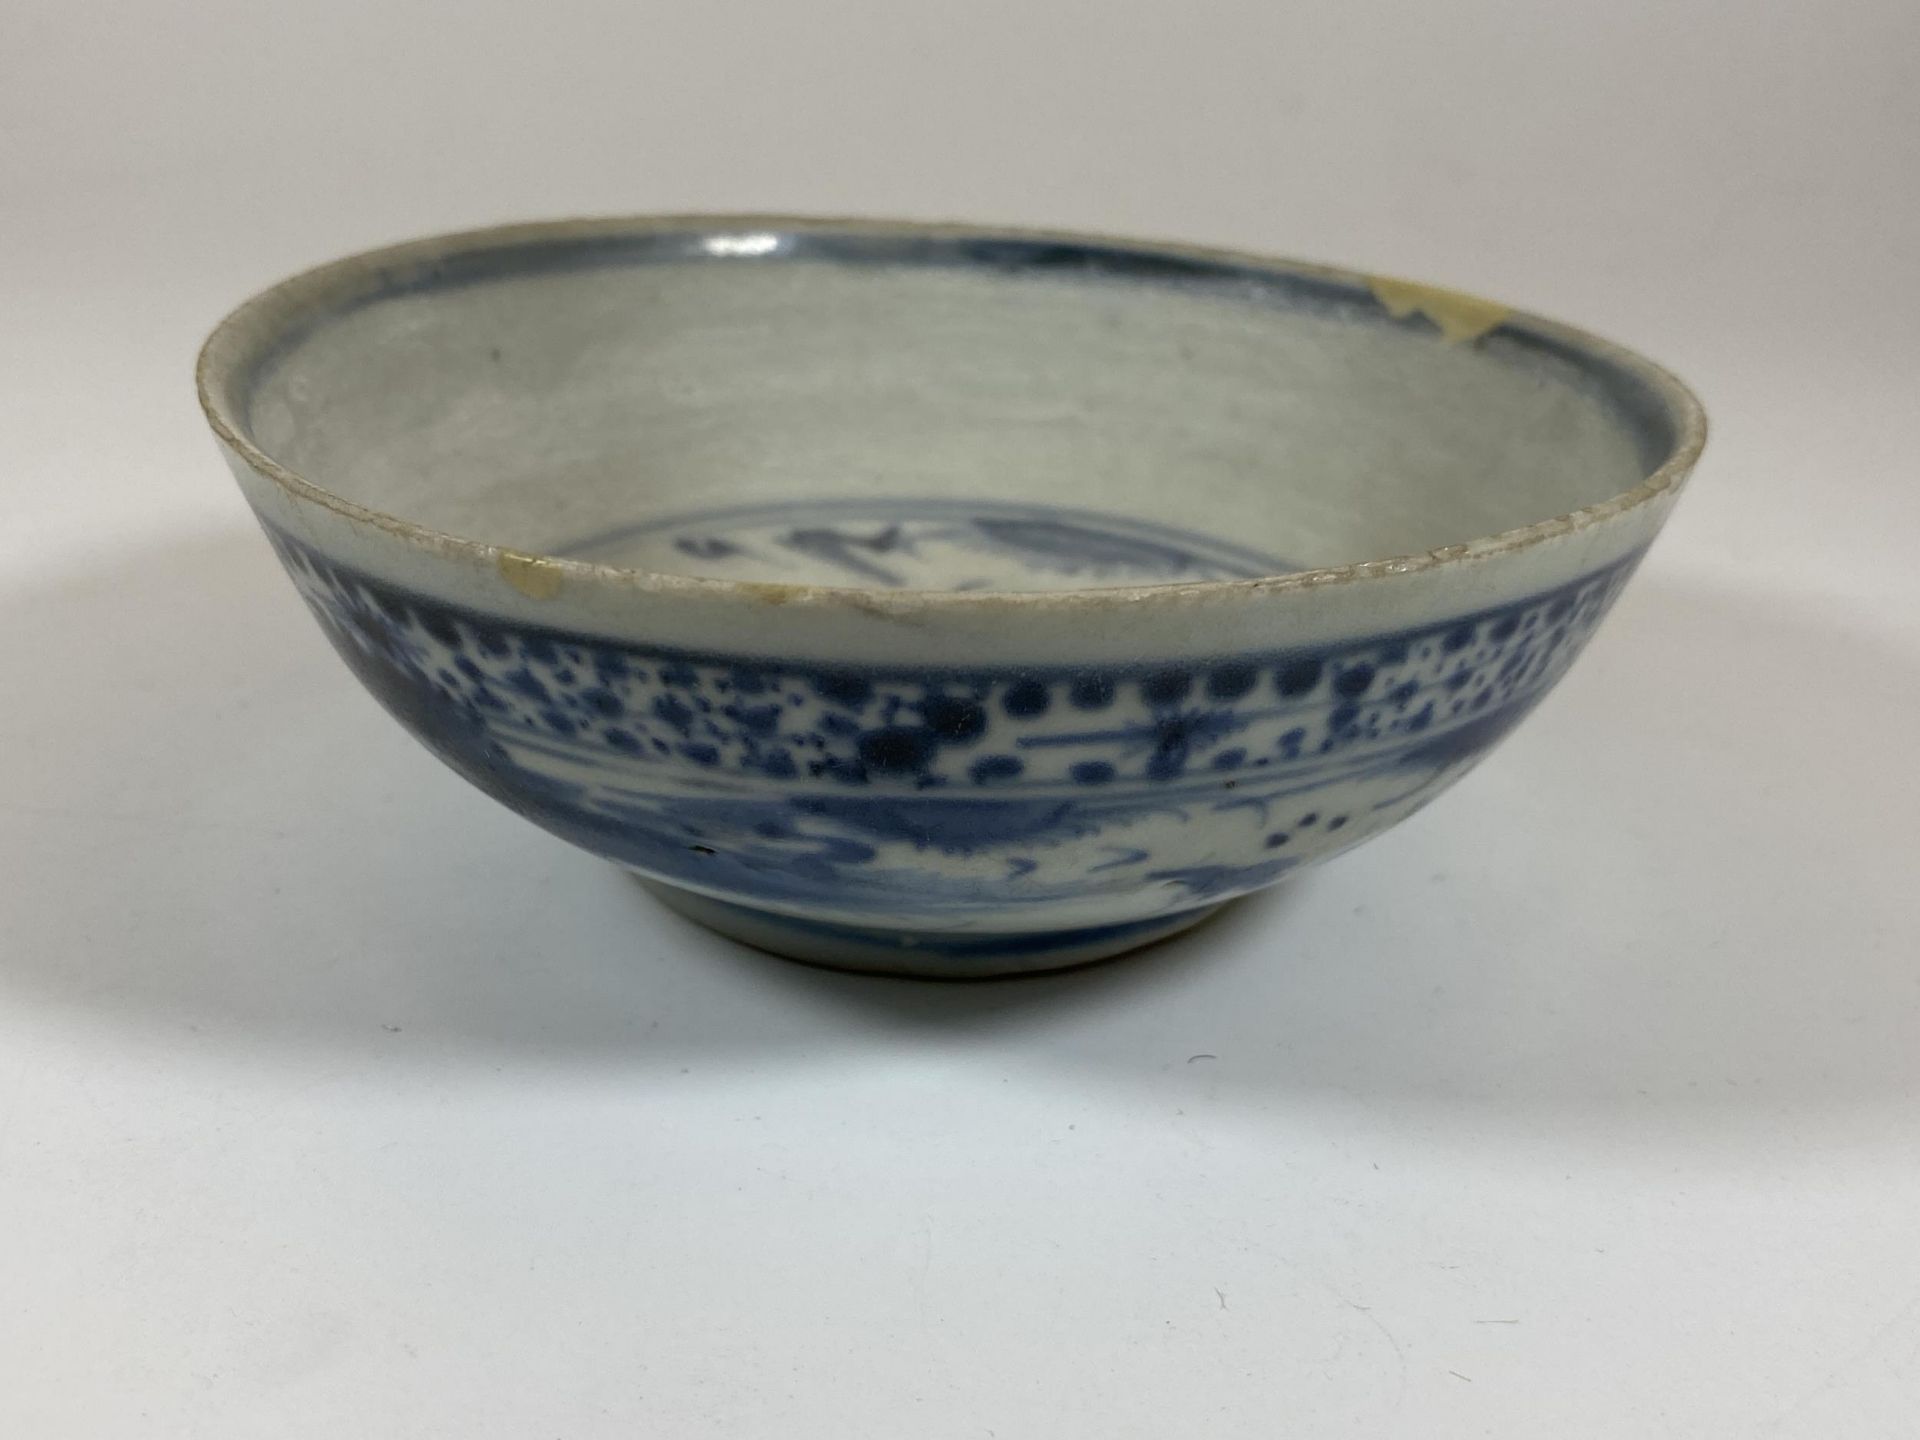 A BELIEVED MING DYNASTY CHINESE BLUE AND WHITE PORCELAIN BOWL, SIX CHARACTER MARK TO BASE DIAMETER - Image 3 of 6